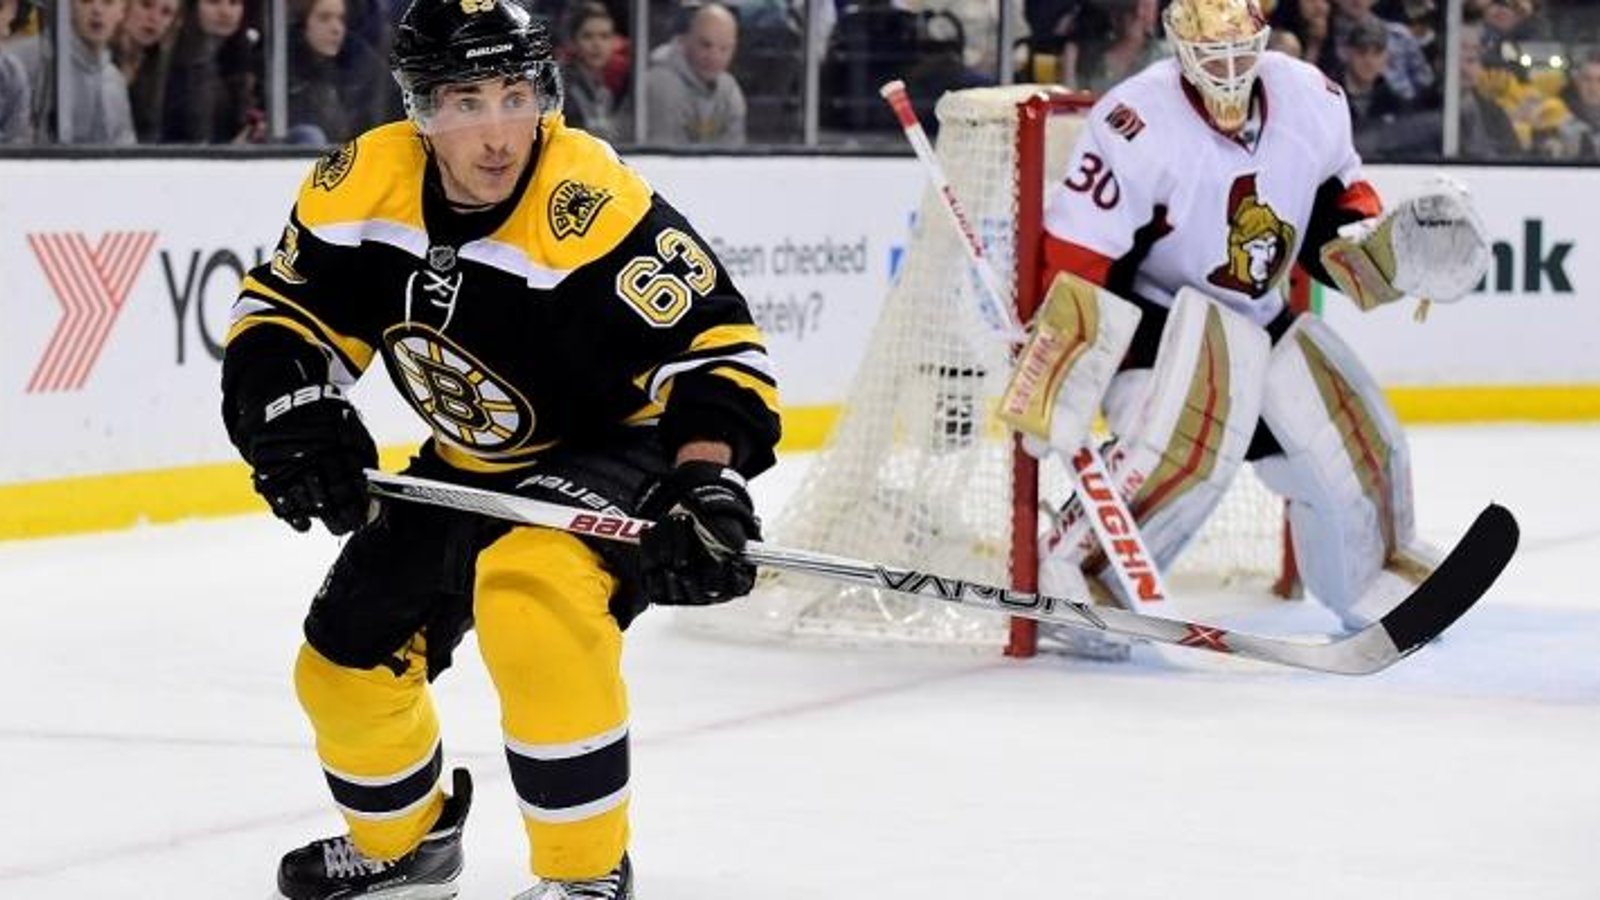 Rumor: Reports of offers on both sides of Bruins/Marchand negotiations.